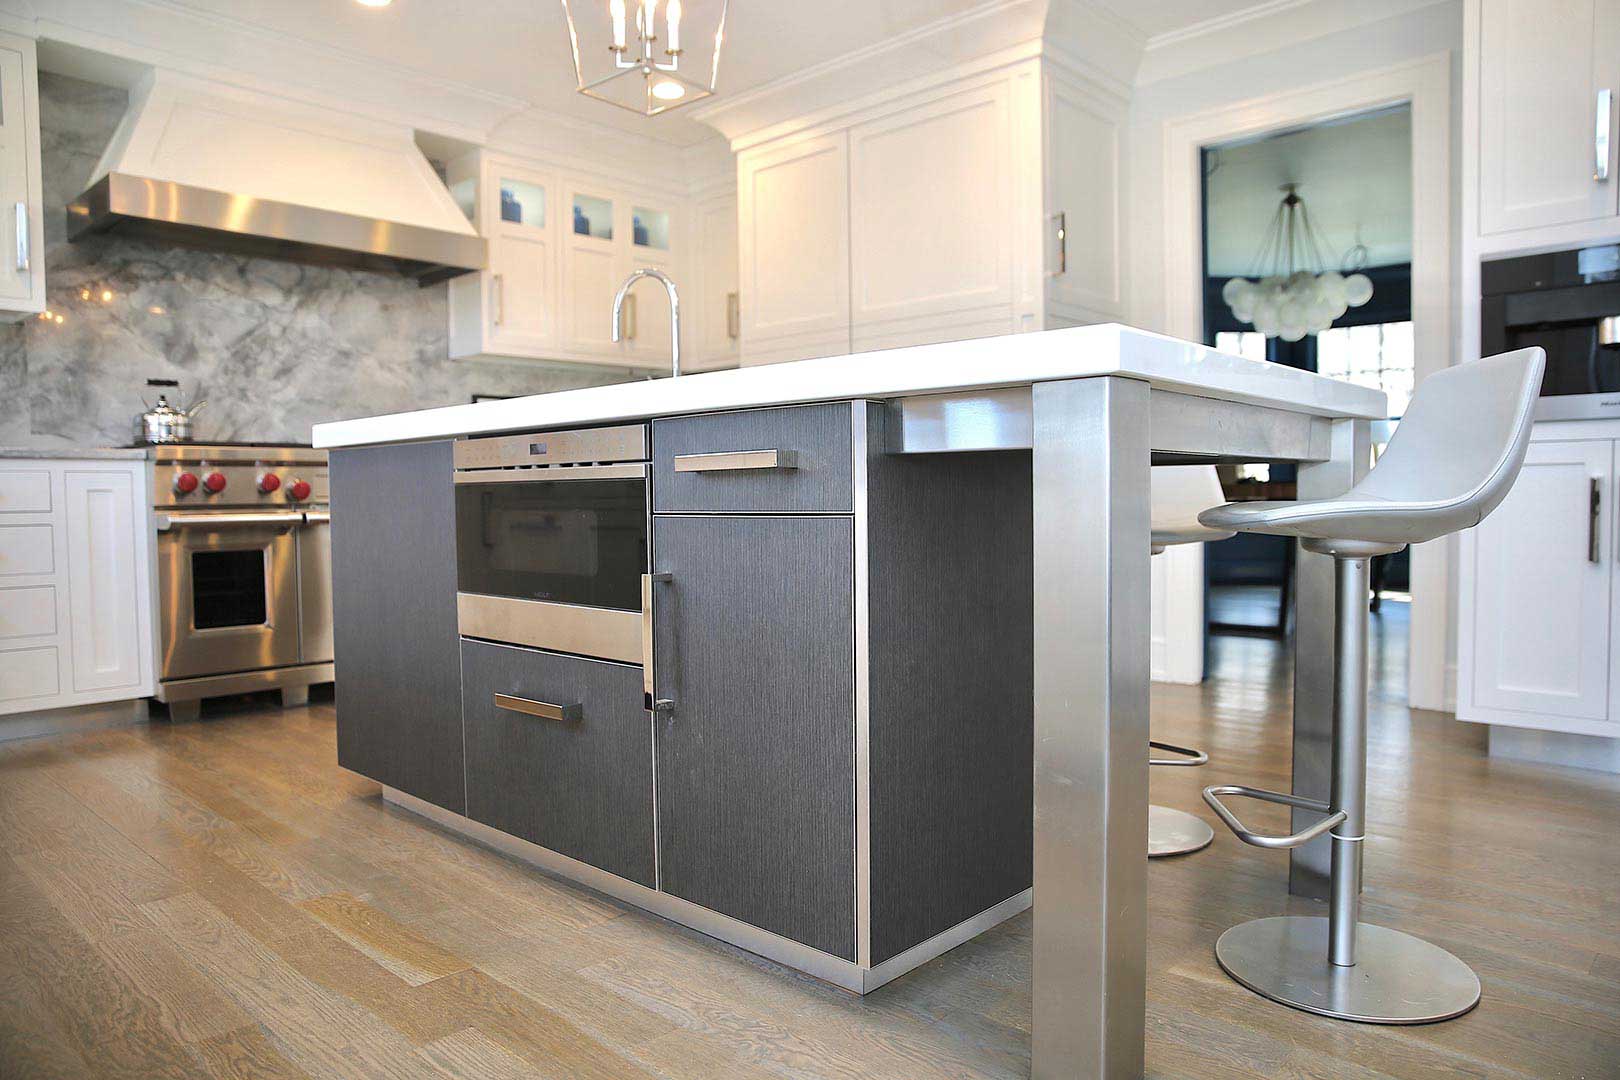 Grey Kitchen Island with Cabinets and Built-in Stove